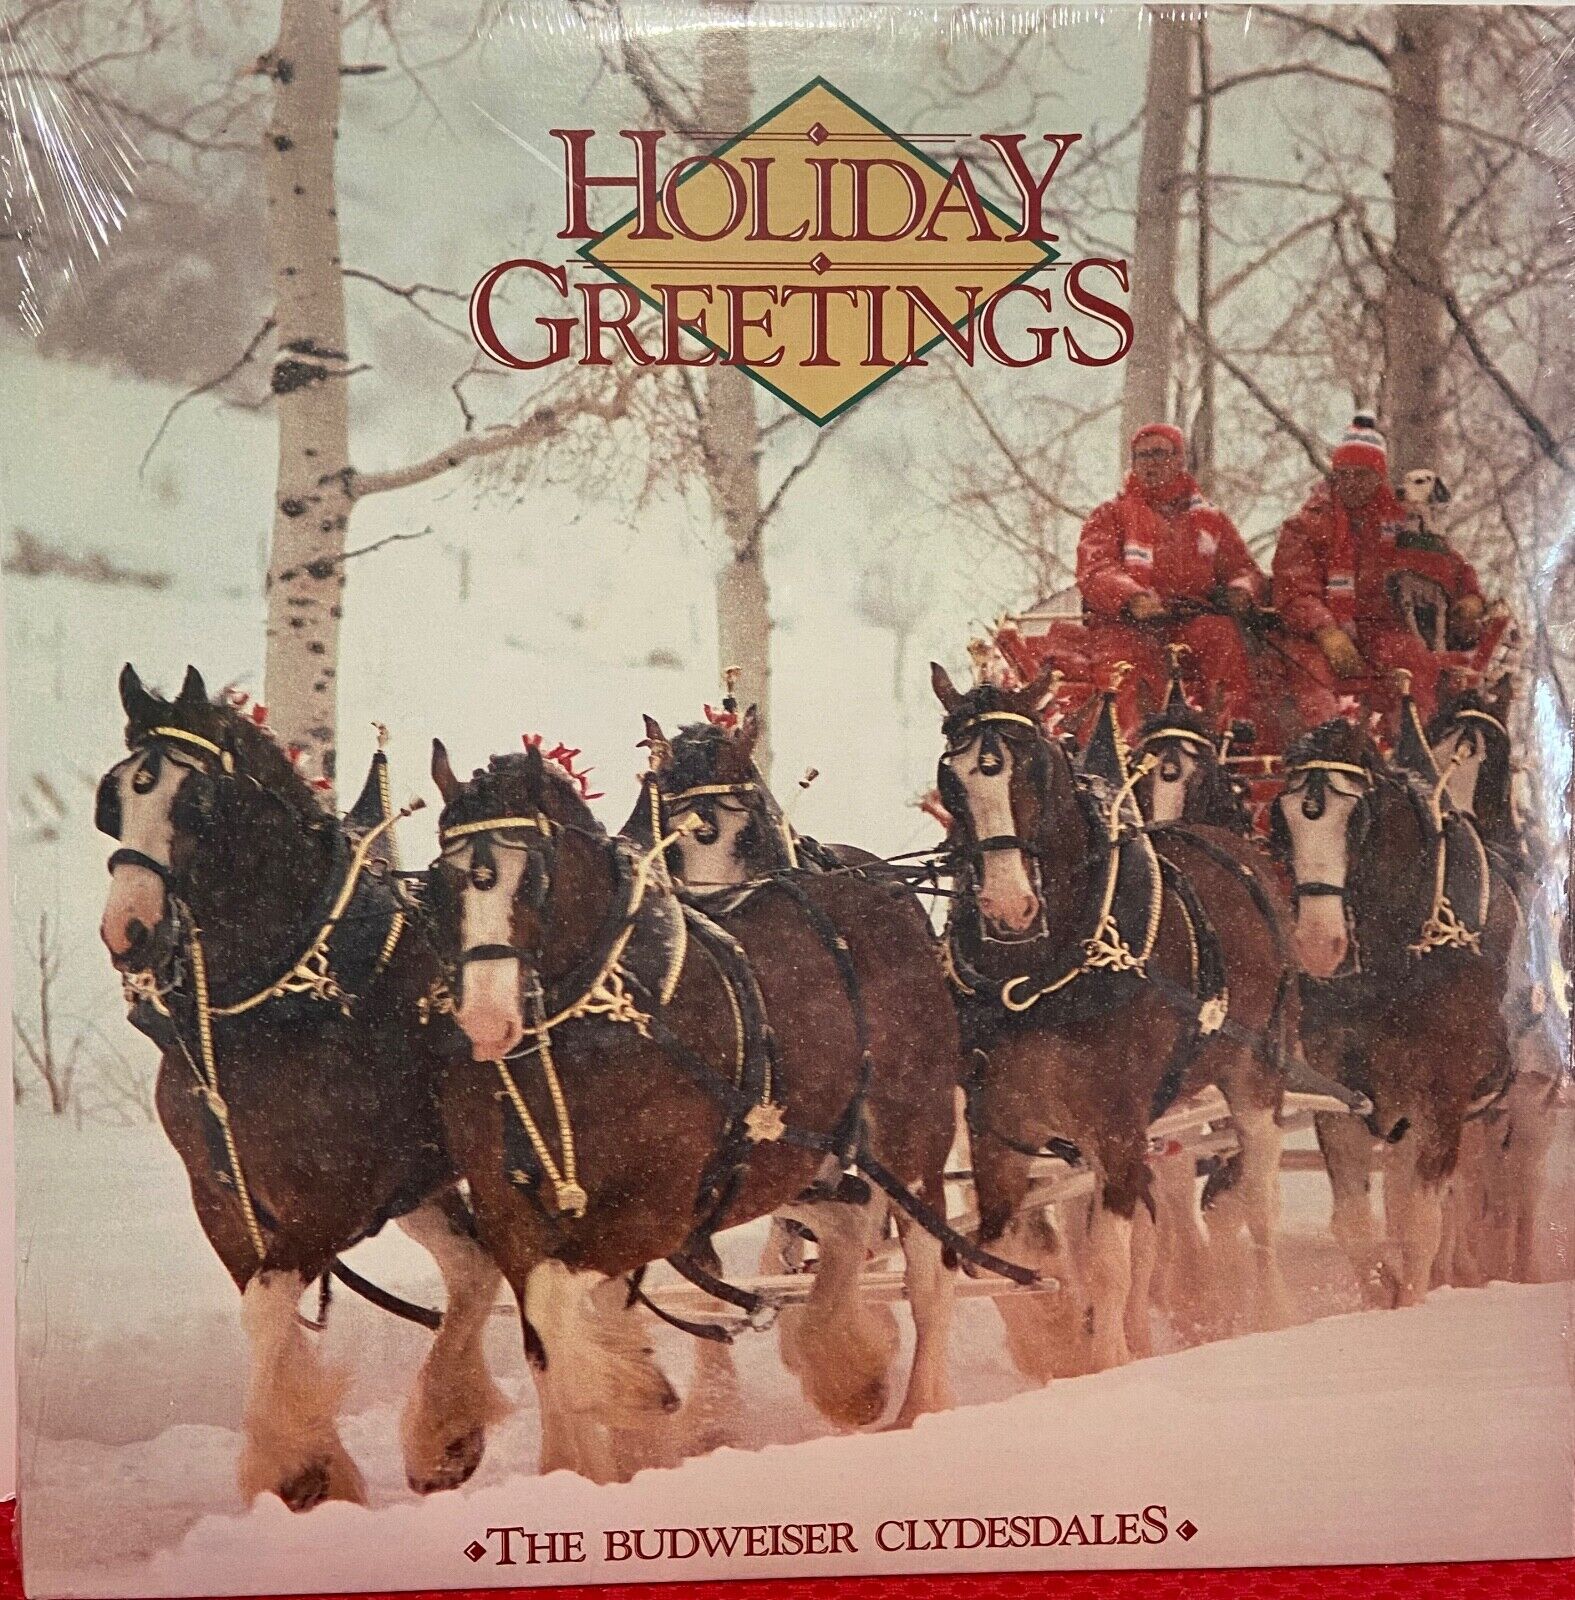 BUDWEISER CLYDESDALE'S HOLIDAY GREETINGS VINYL LP RECORD NEW SEALED Christmas 